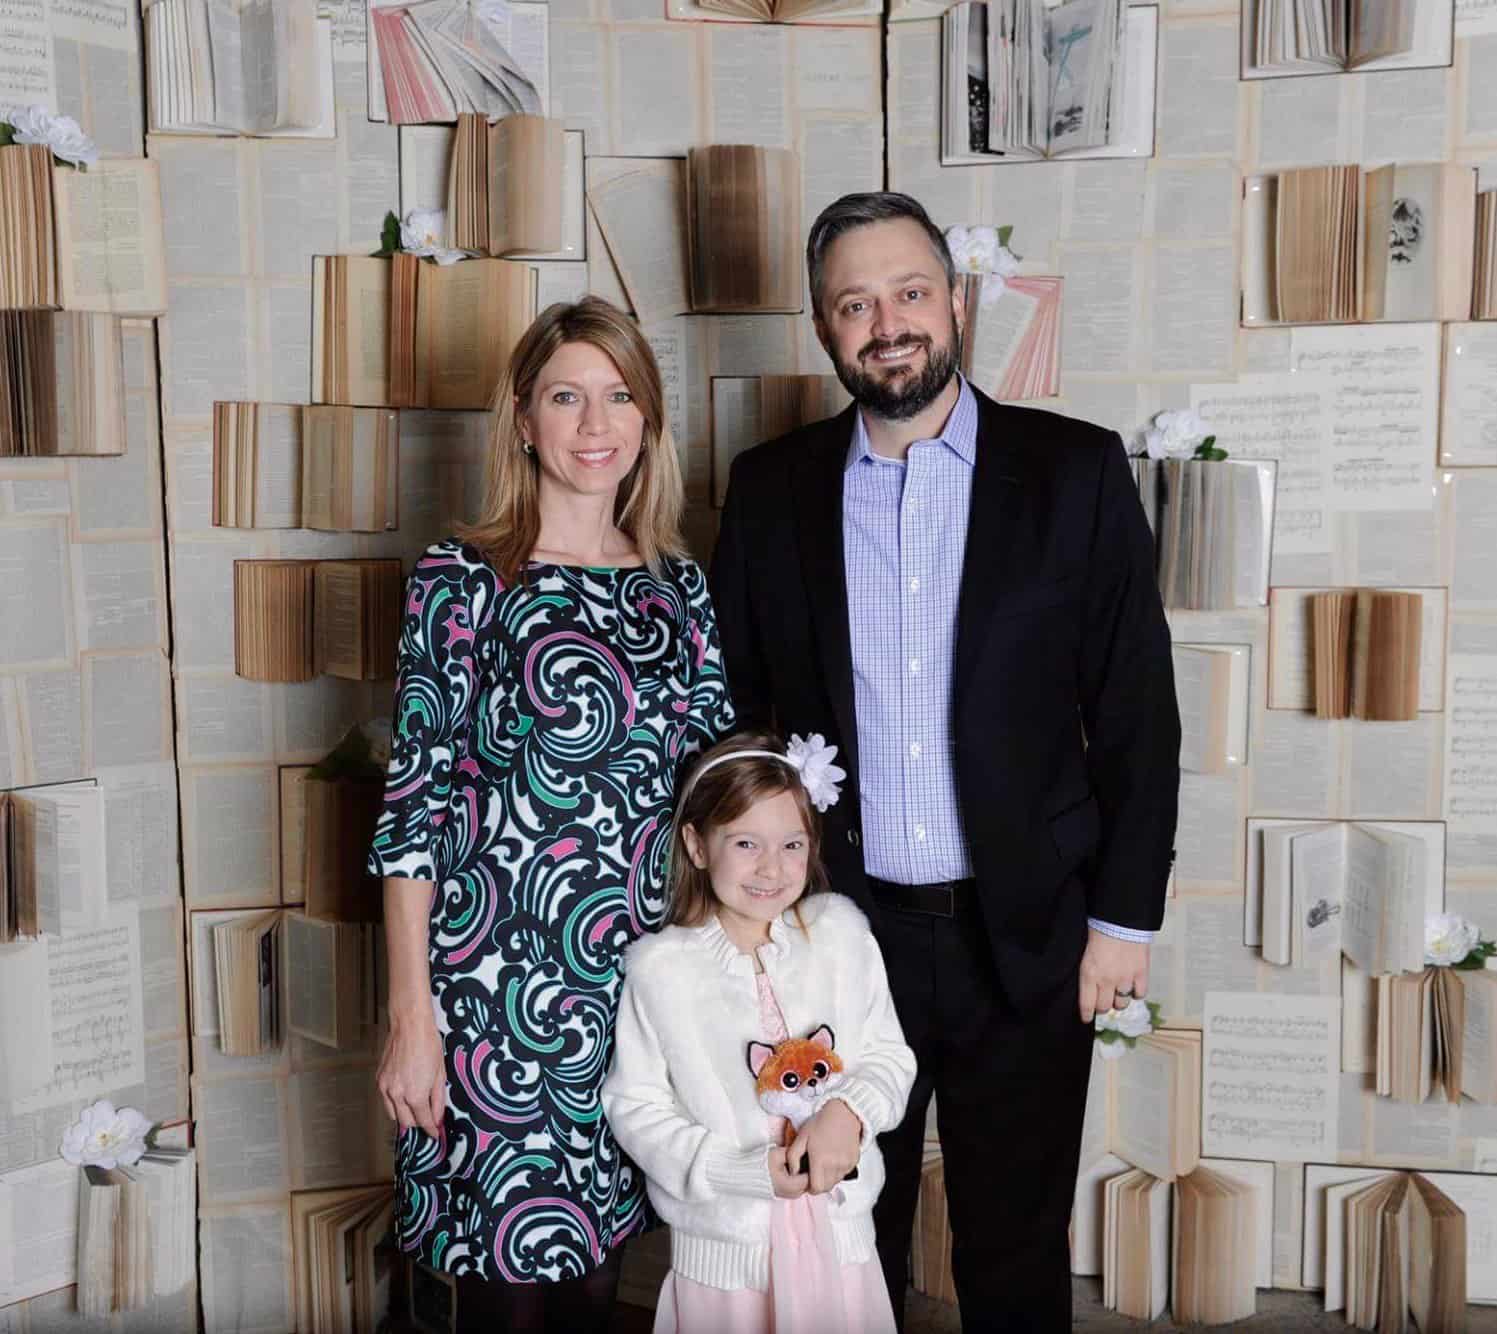 Nate Bargatze with his wife and daughter